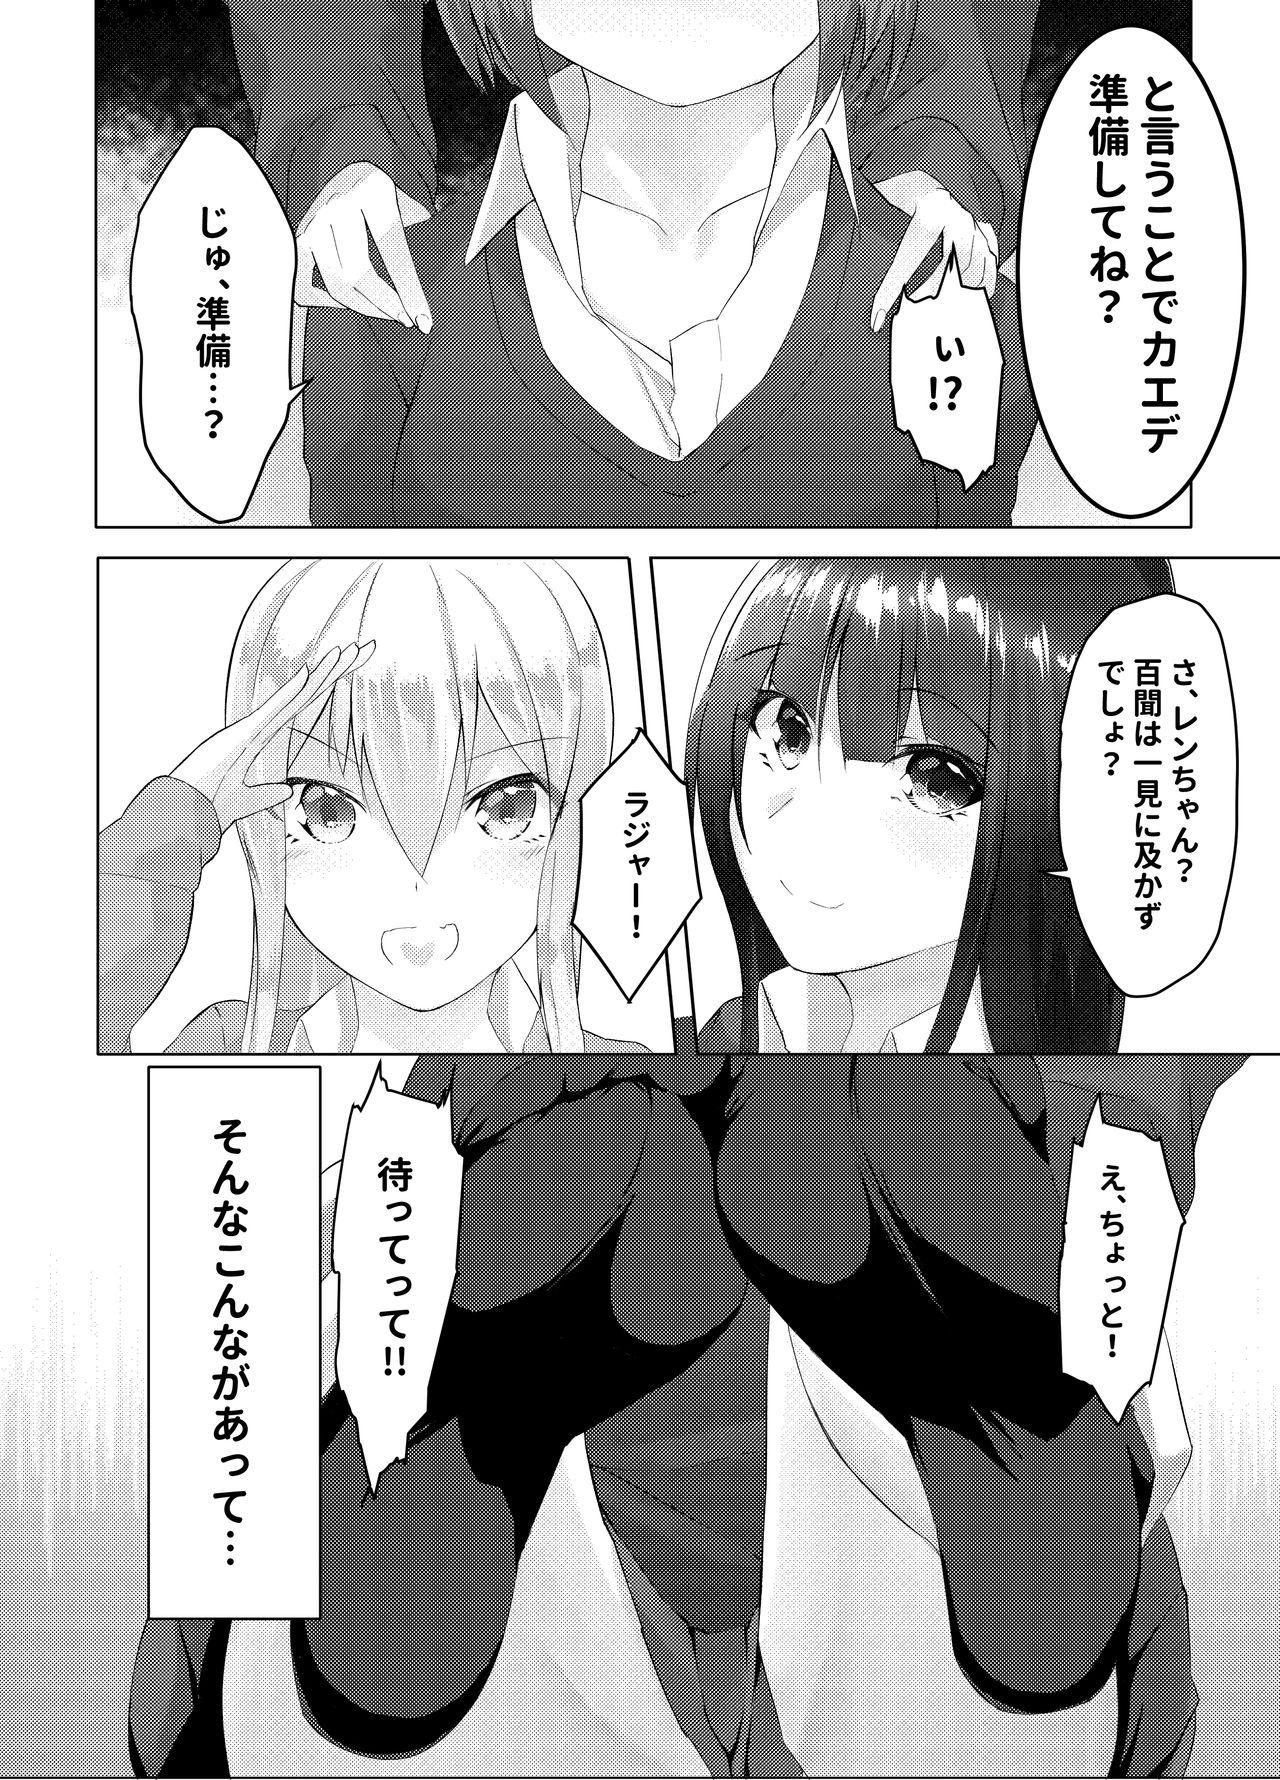 From 妹はすぐ脱ぐ 〜二人の前で脱ぐ〜 Shower - Page 8